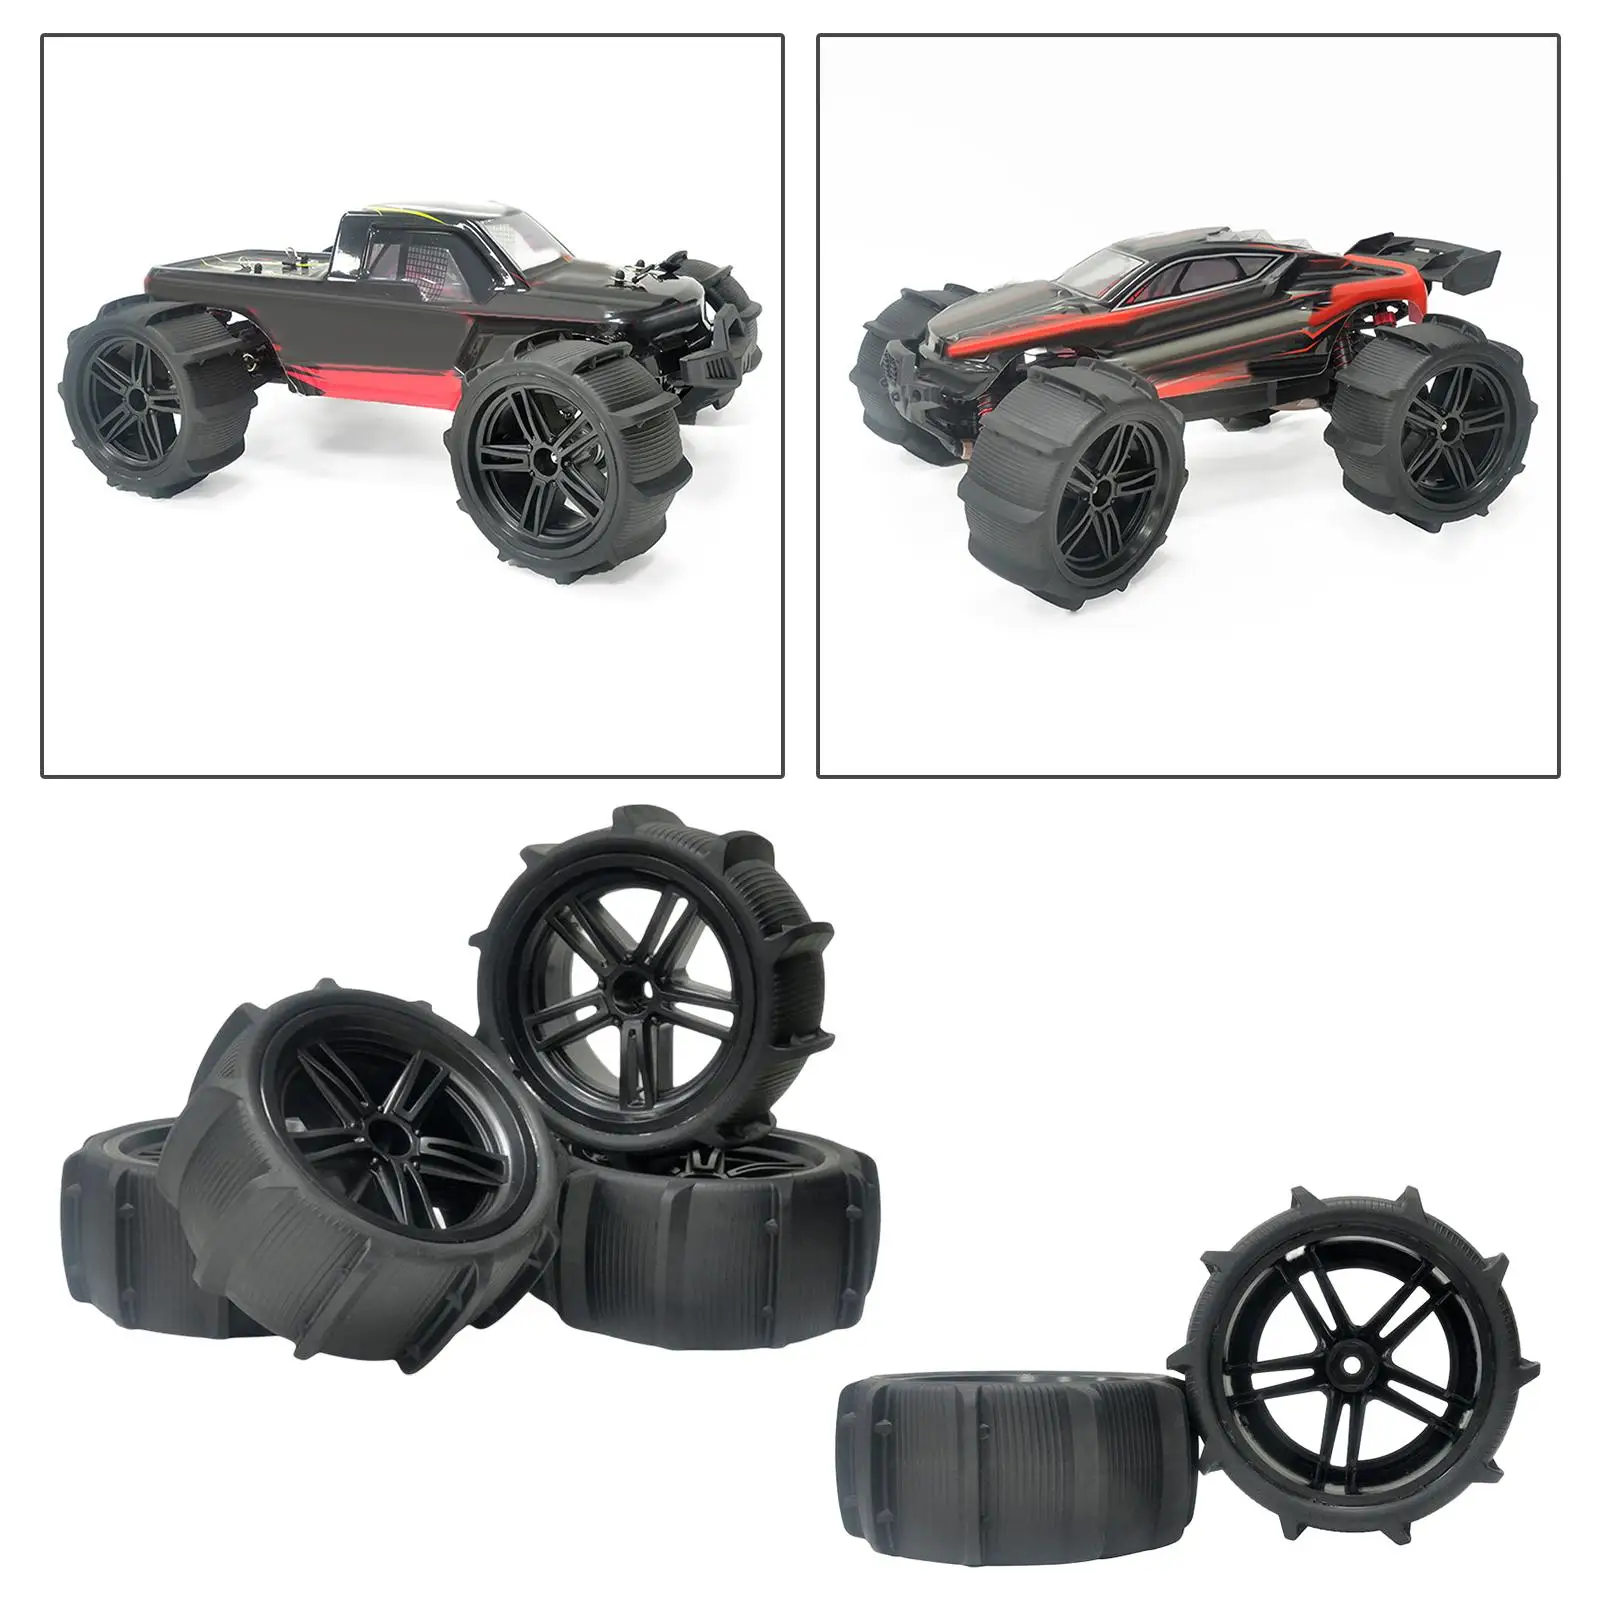 1:10 Scale RC Sand Wheel Tires Replaces Upgrade Parts for DIY Parts Crawler